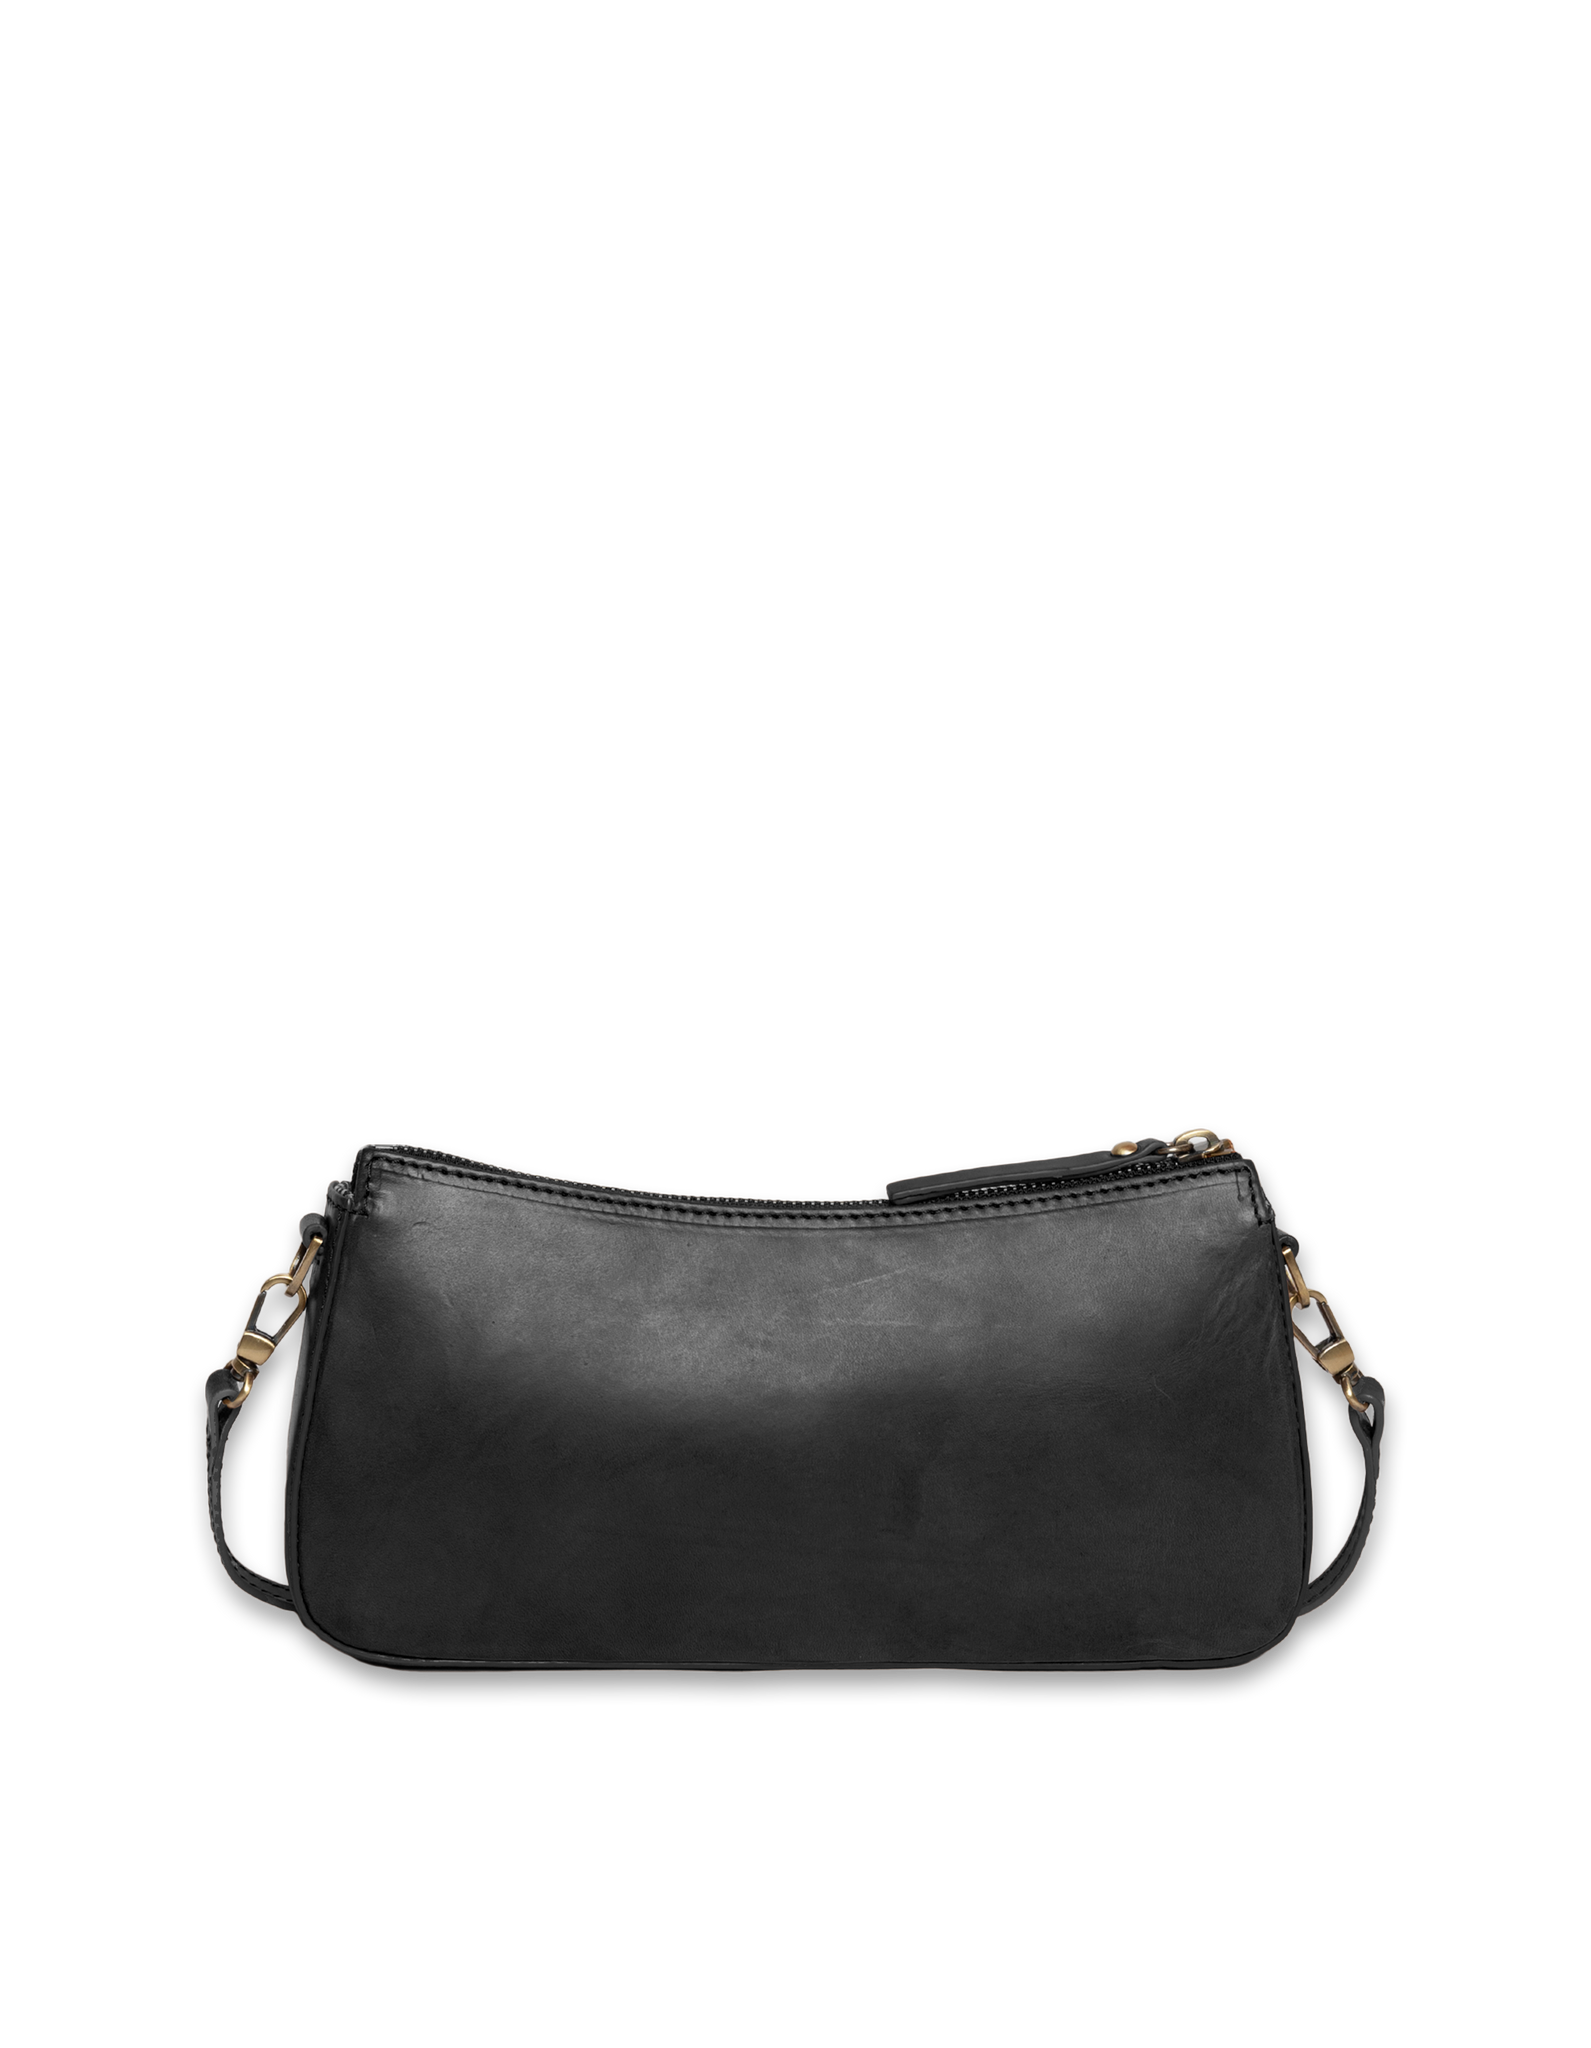 Taylor - Black Classic Leather